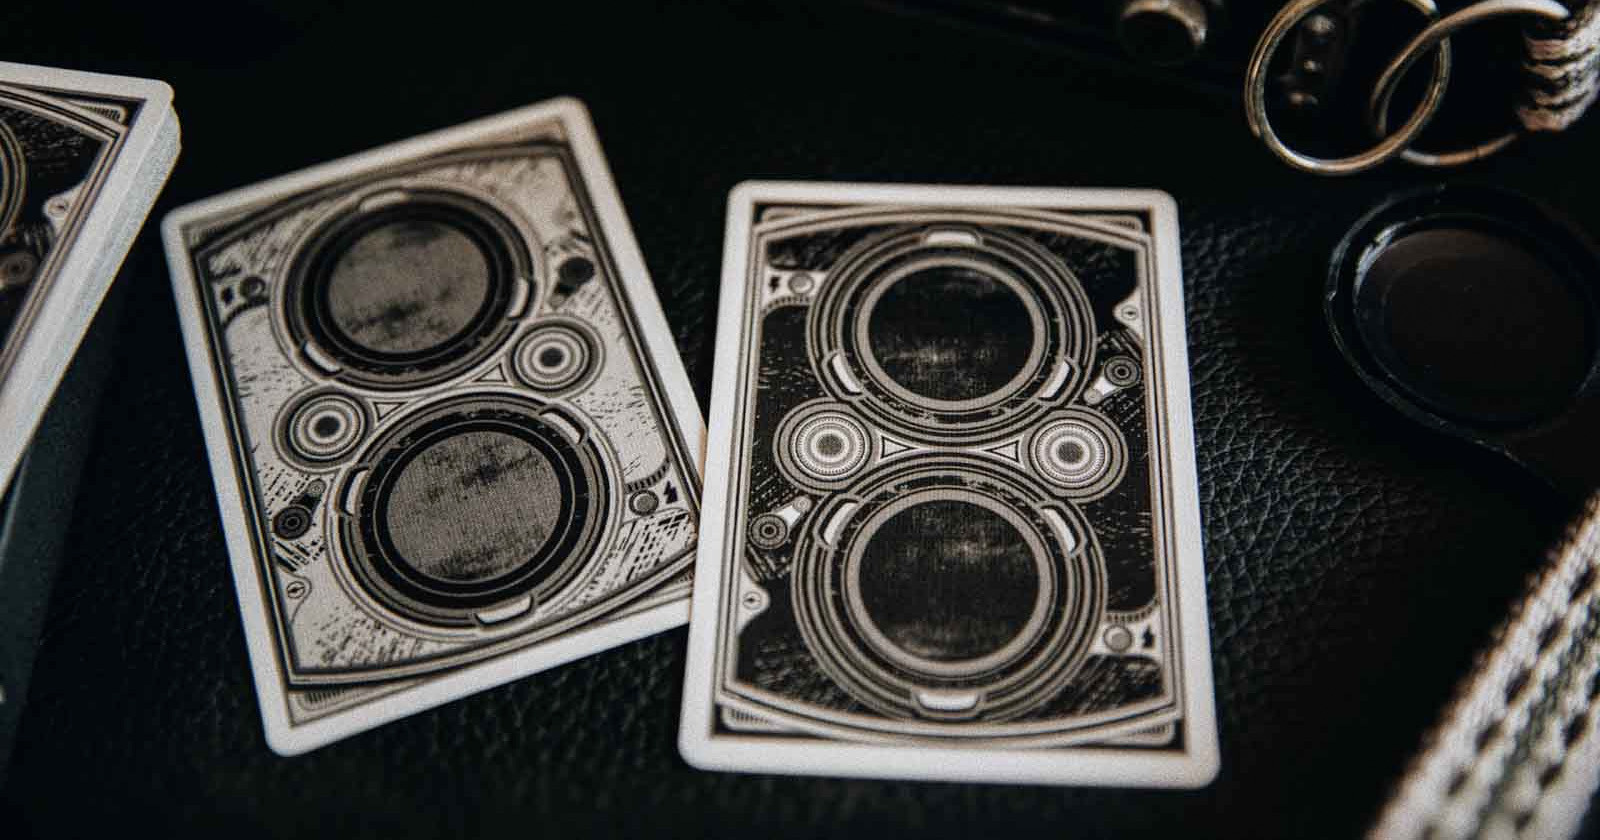  these vintage playing cards are modeled rolleiflex 